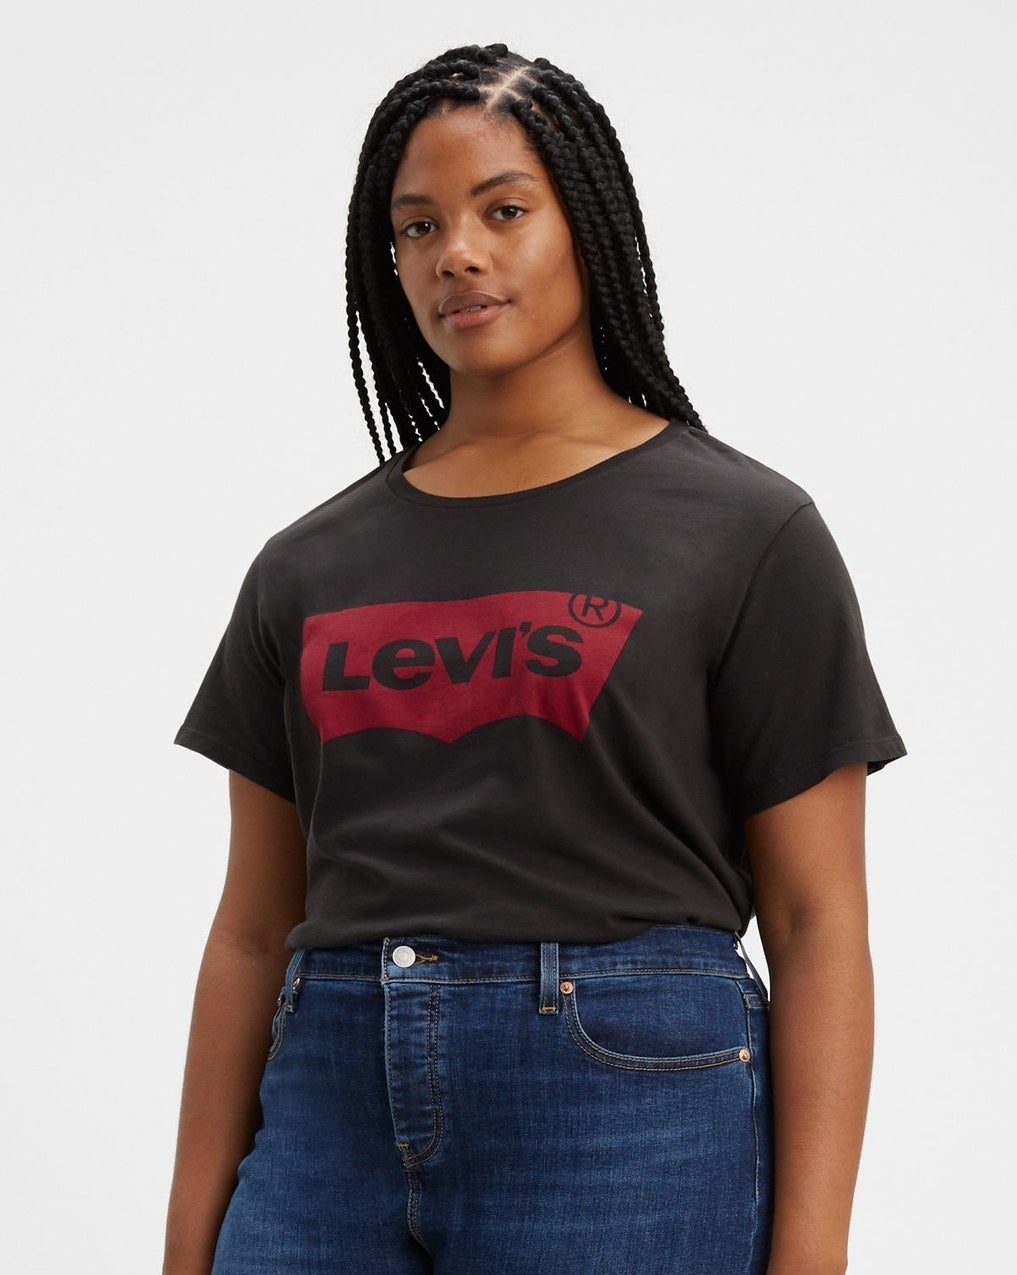 Stylish Bestselling Levi's Jeans And Clothing